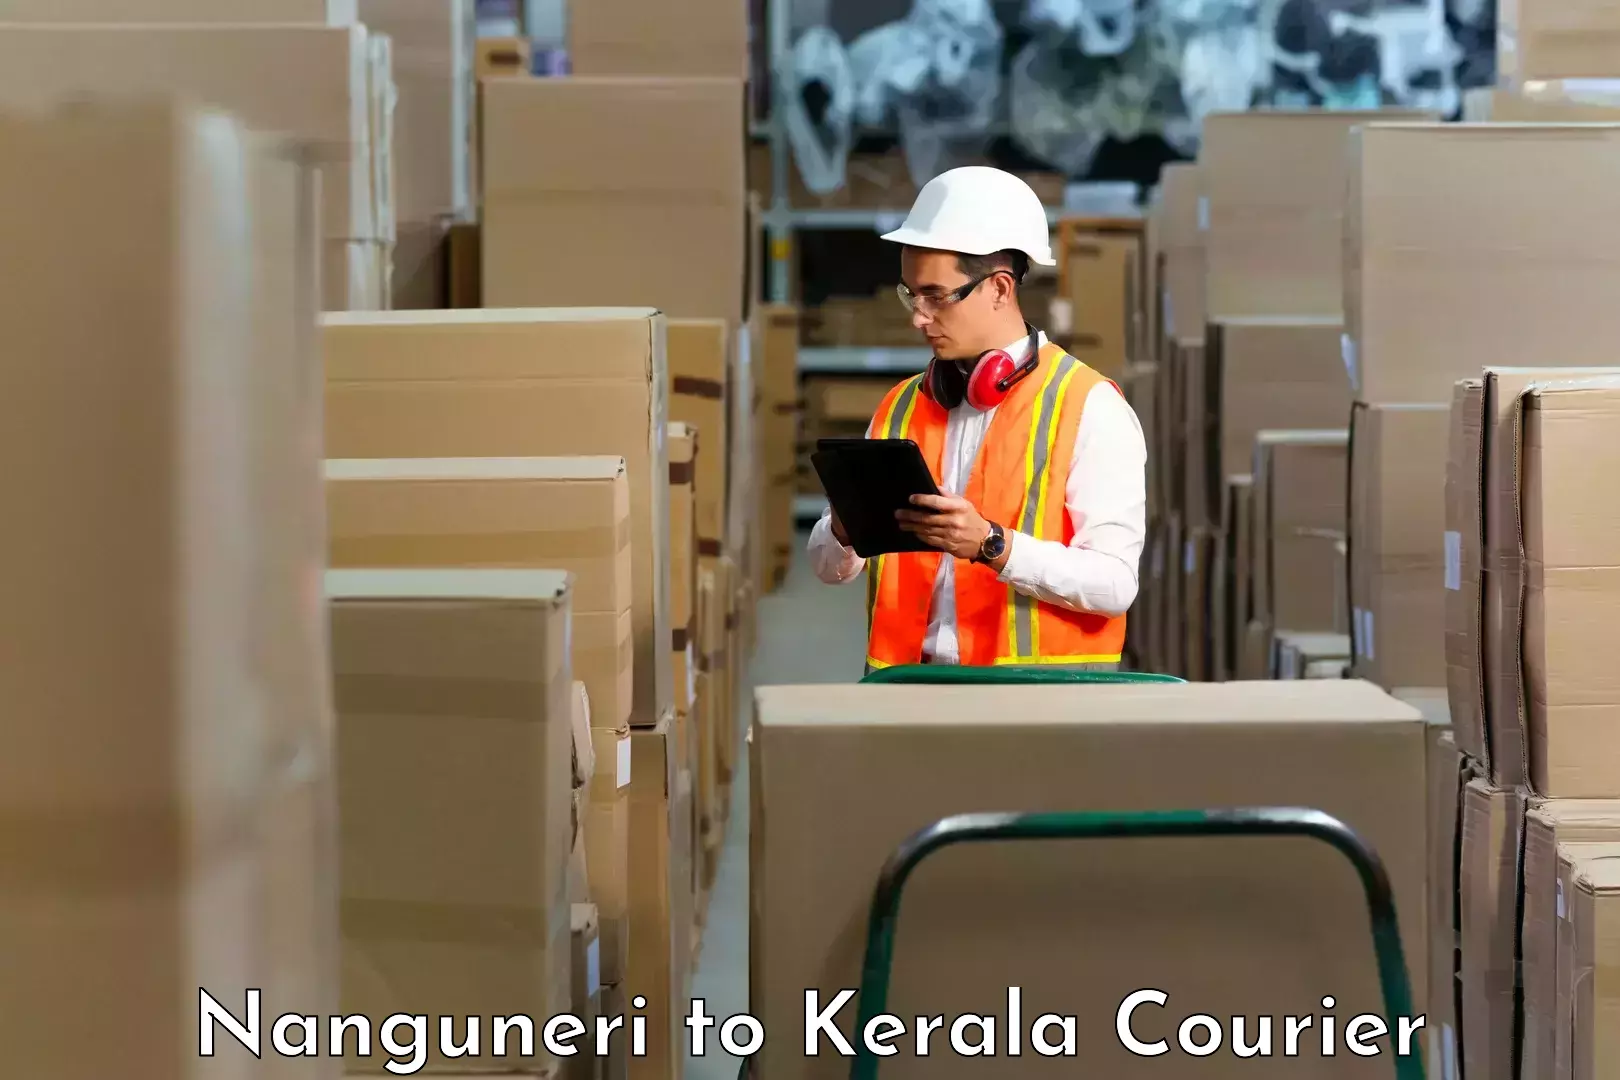 Package delivery network Nanguneri to Punalur